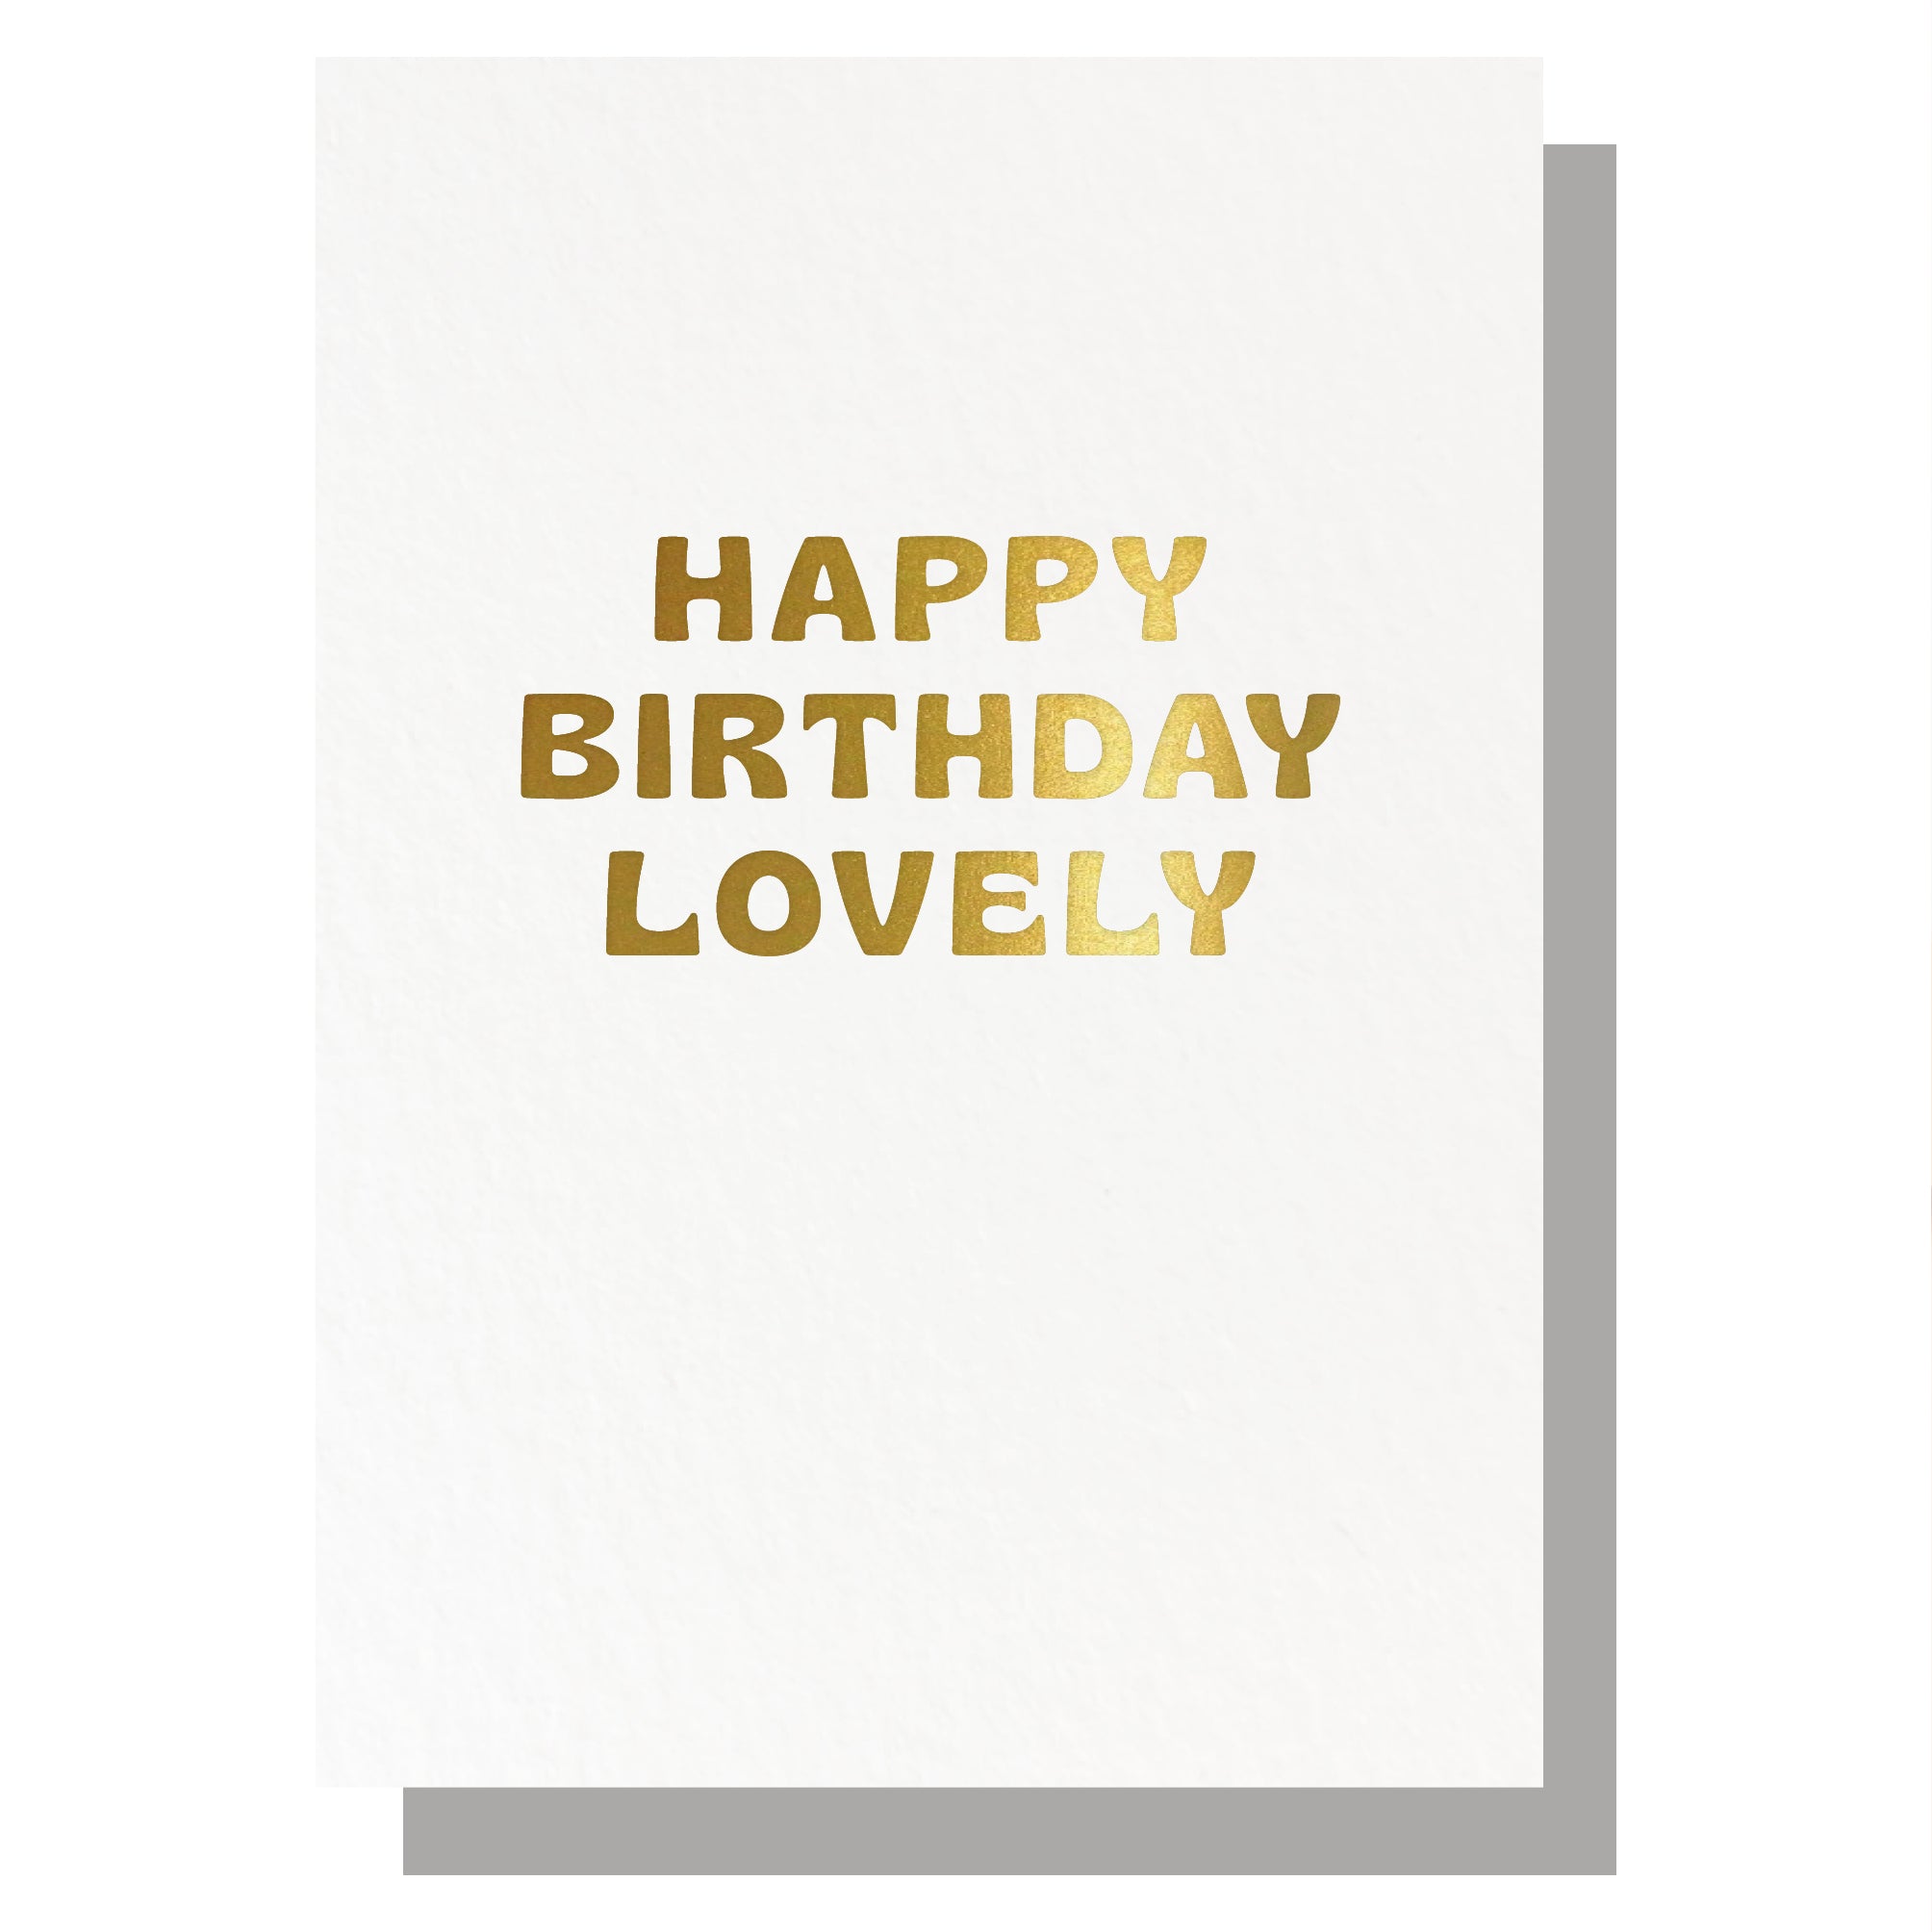 HAPPY BIRTHDAY LOVELY (GOLD ON WHITE) | CARD BY LUCKY INK